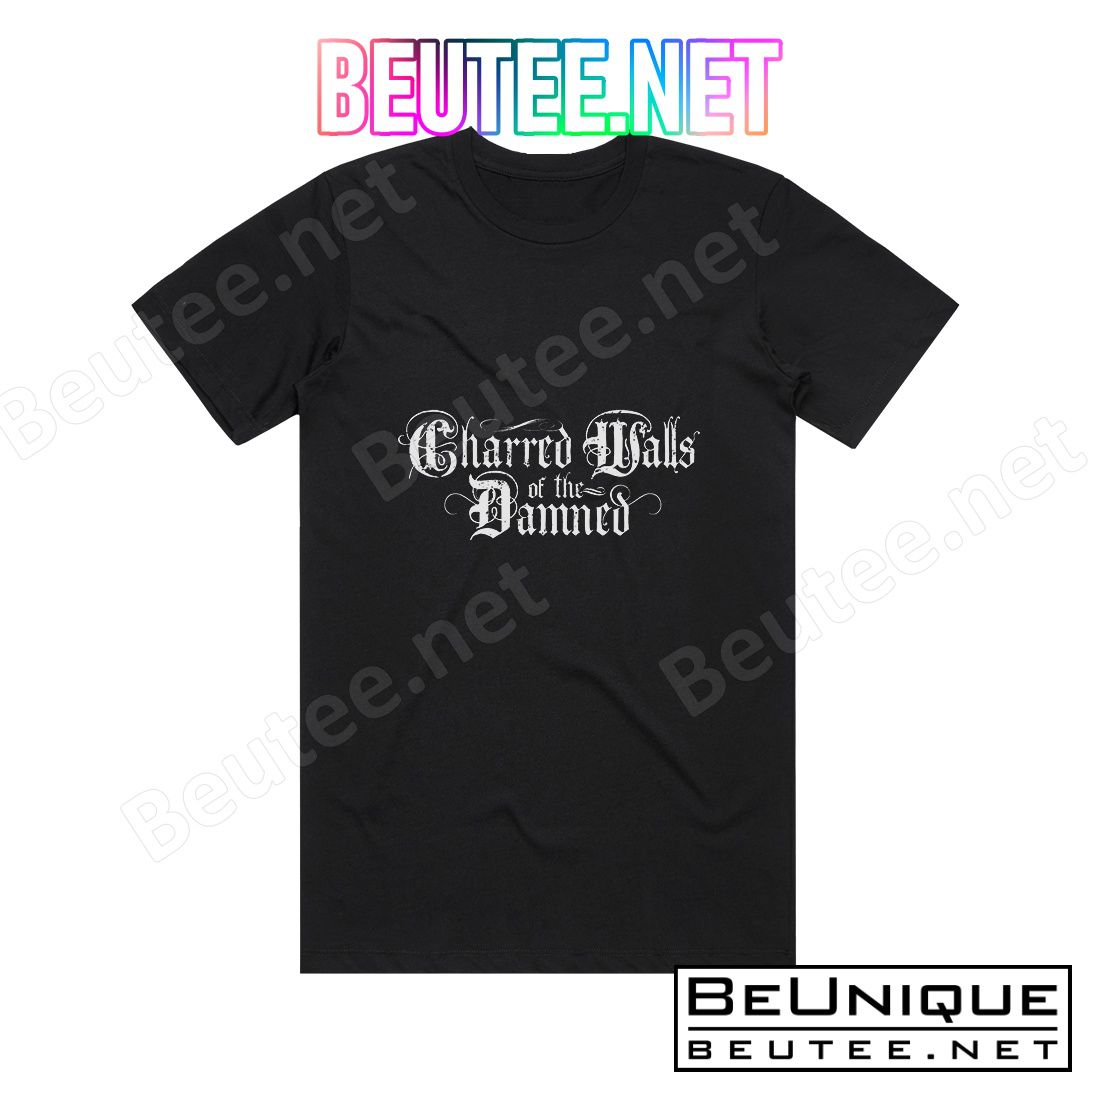 Charred Walls of the Damned Nice Dreams Album Cover T-Shirt